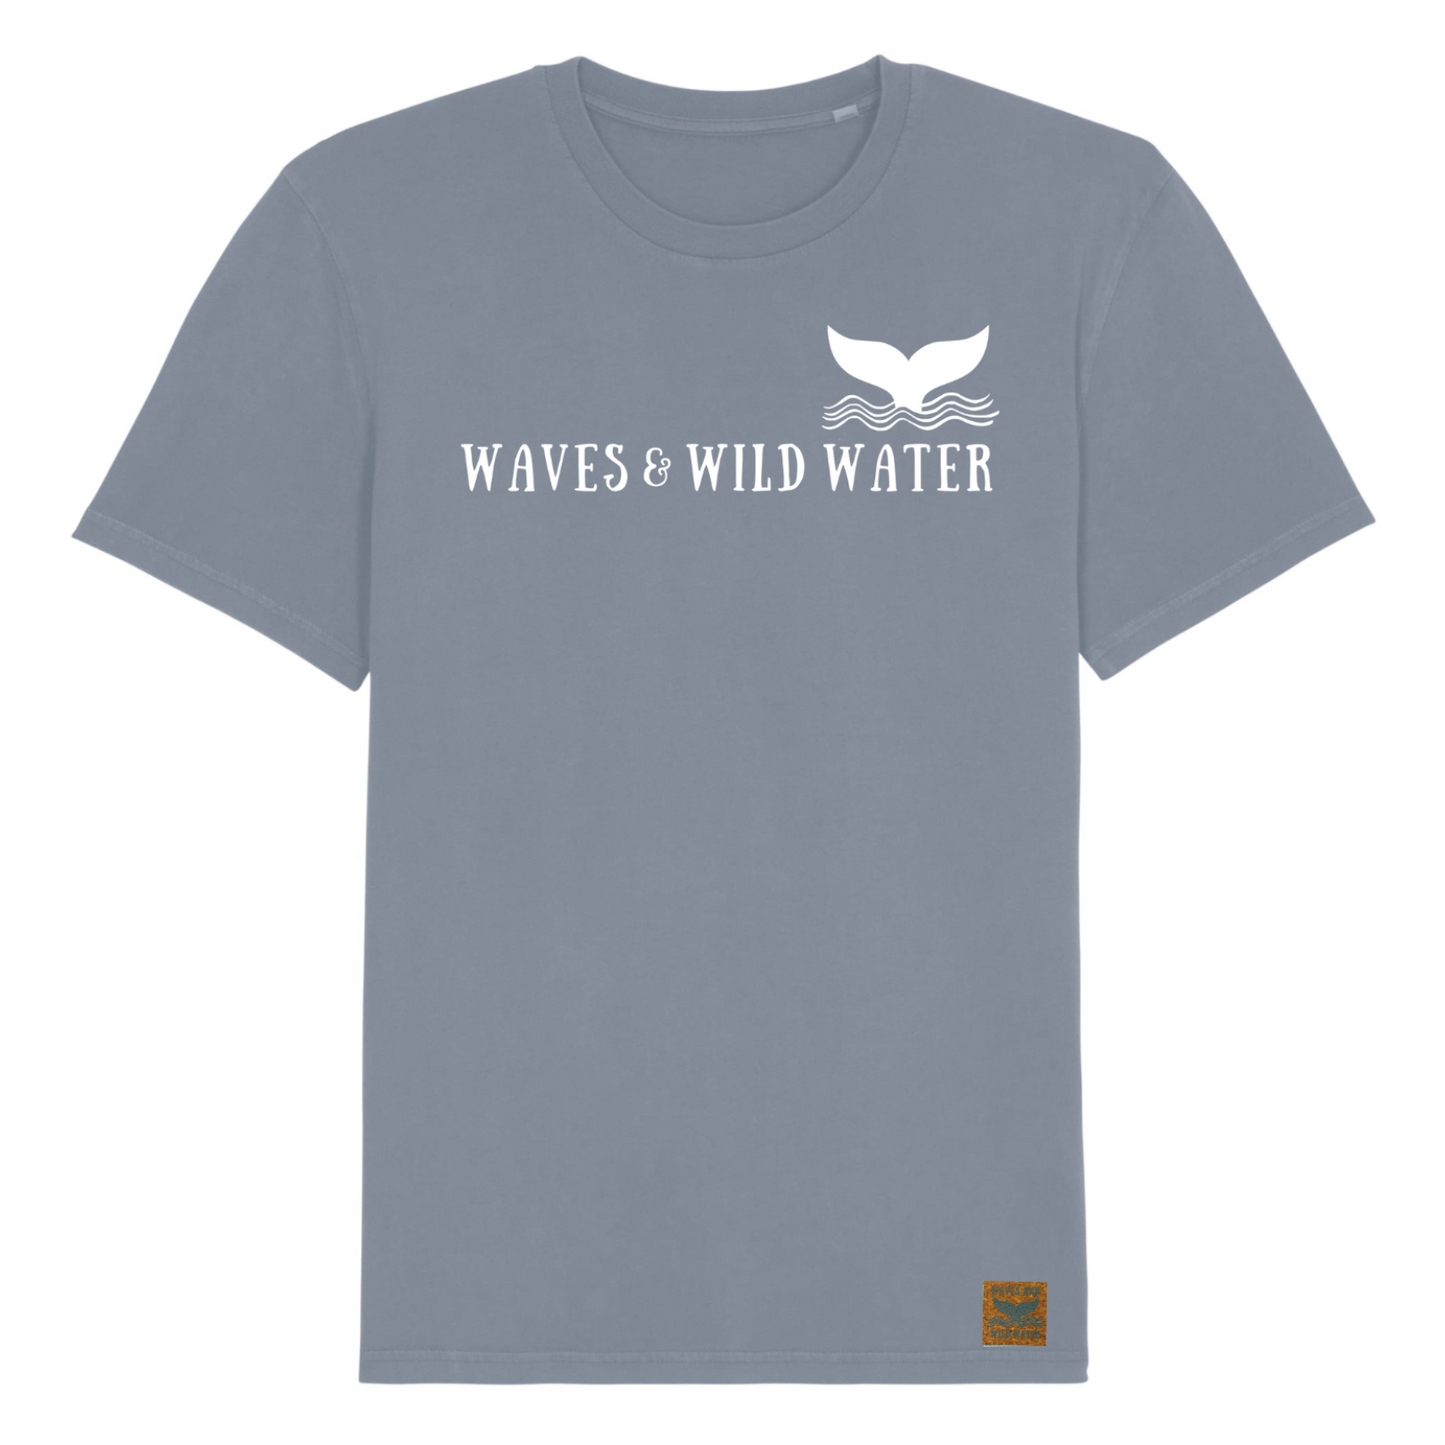 A grey t-shirt with Waves & Wild Water printed across the front in white ink. There is also a logo with a whale tail coming out of waves on the chest.